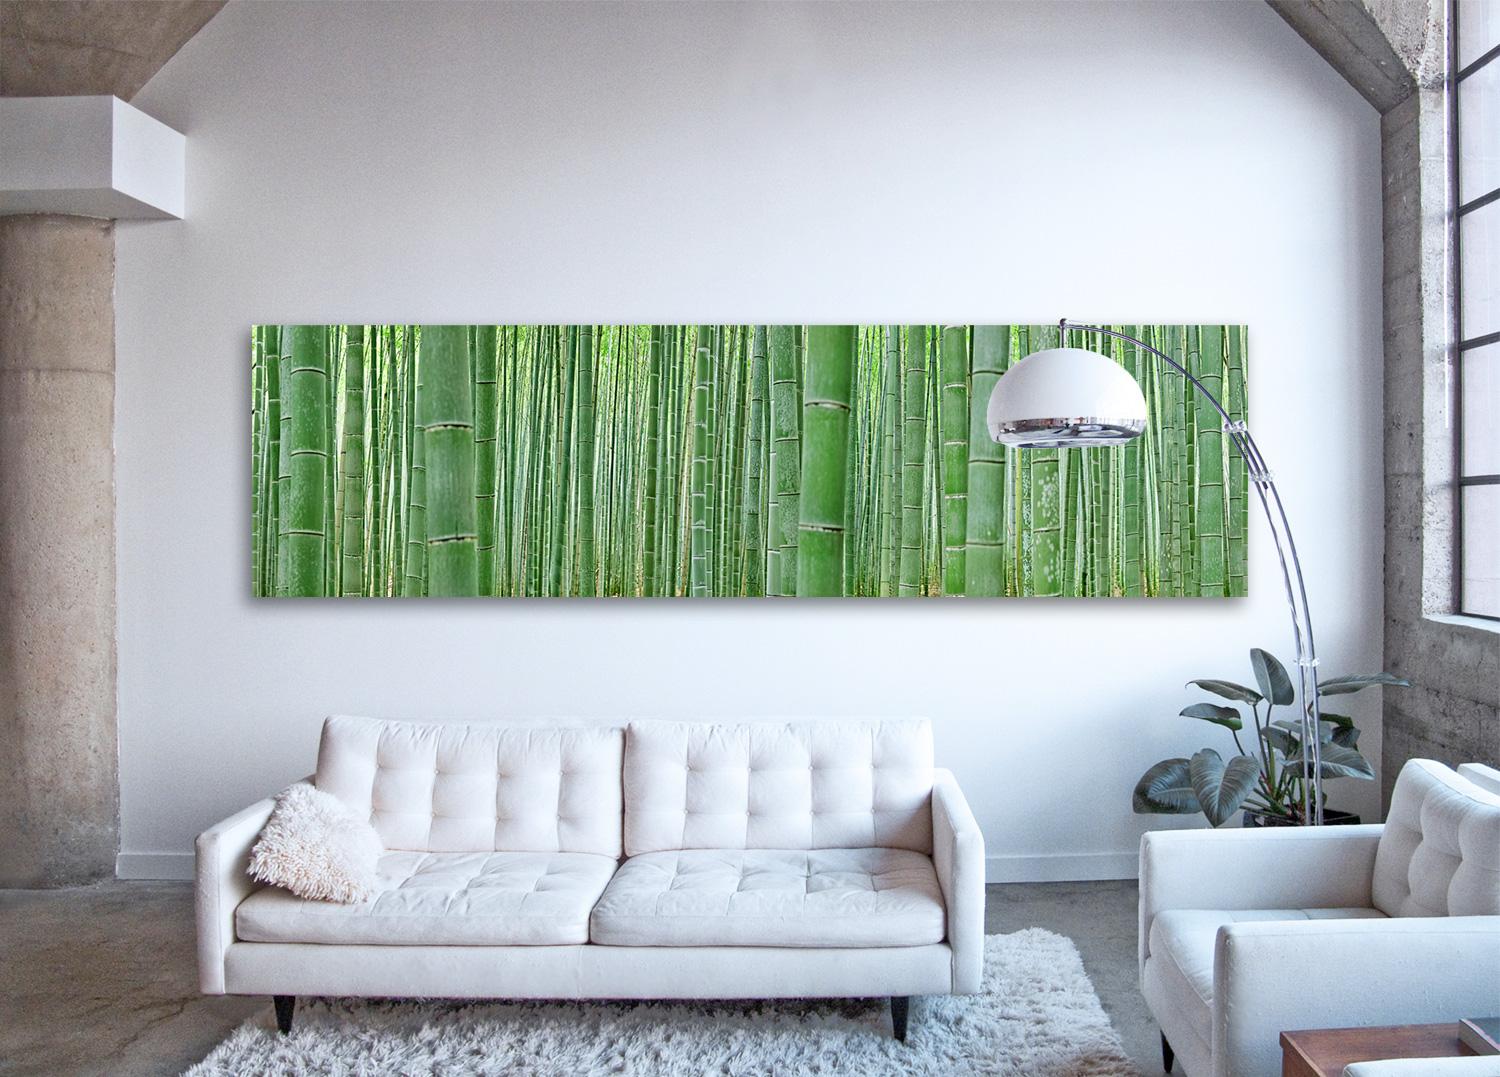 large scale abstract panoramic photograph of lush emerald green nature biotope, a highly detailed observation of the natural beauty of Japan's famous Arashiyama Bamboo Grove

Bamboo Forest by Erik Pawassar  
48 x 175 inches (122 x 444cm)
six